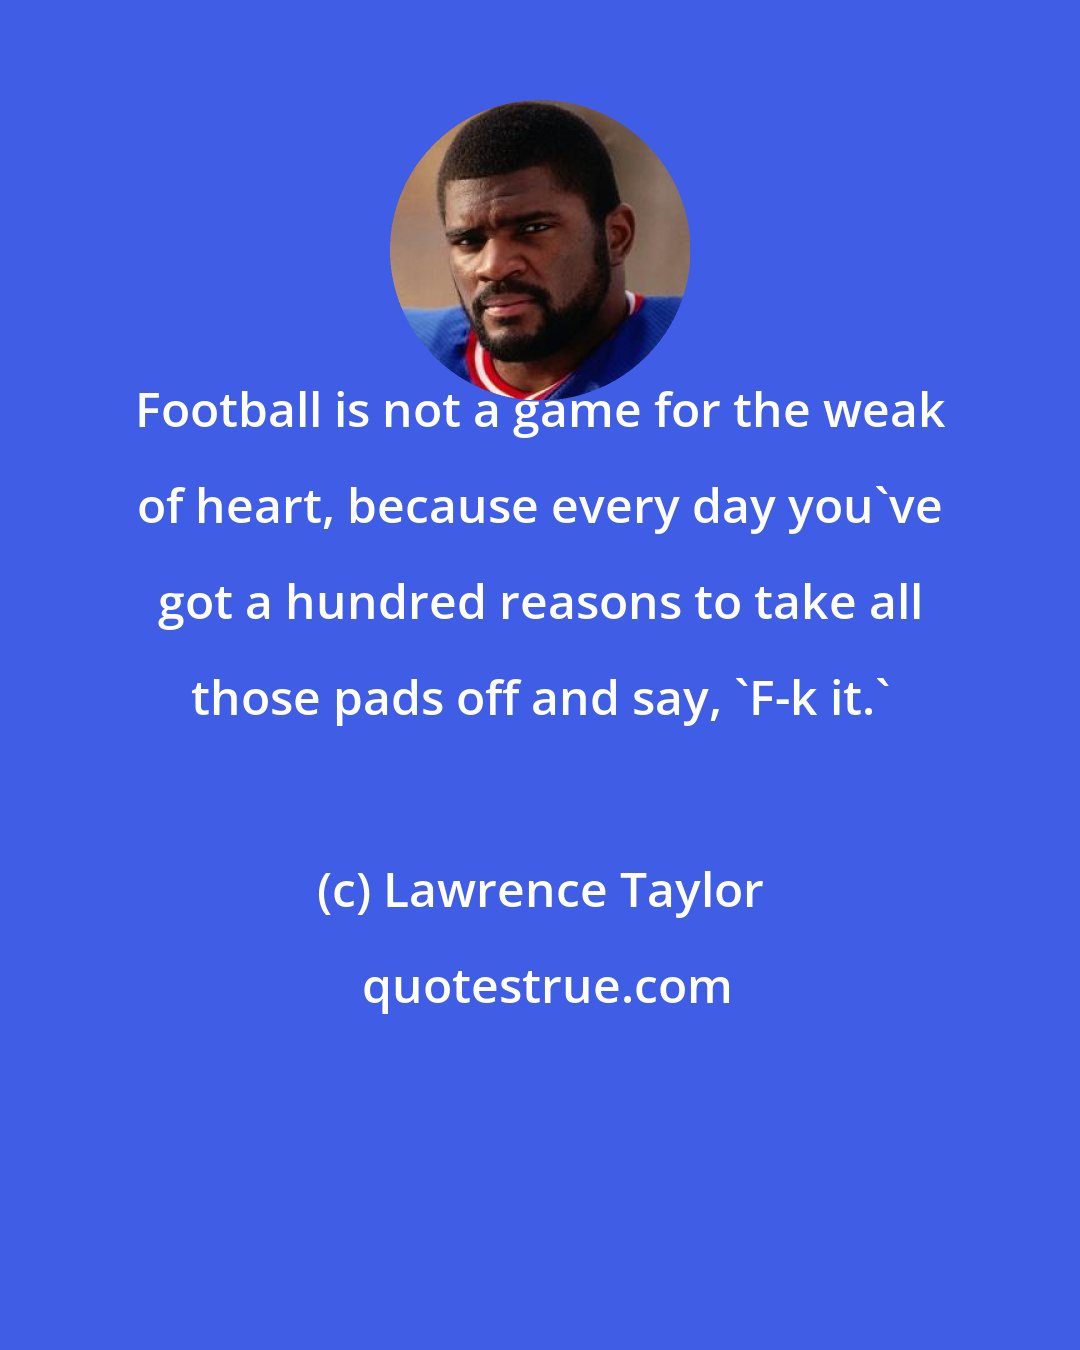 Lawrence Taylor: Football is not a game for the weak of heart, because every day you've got a hundred reasons to take all those pads off and say, 'F-k it.'